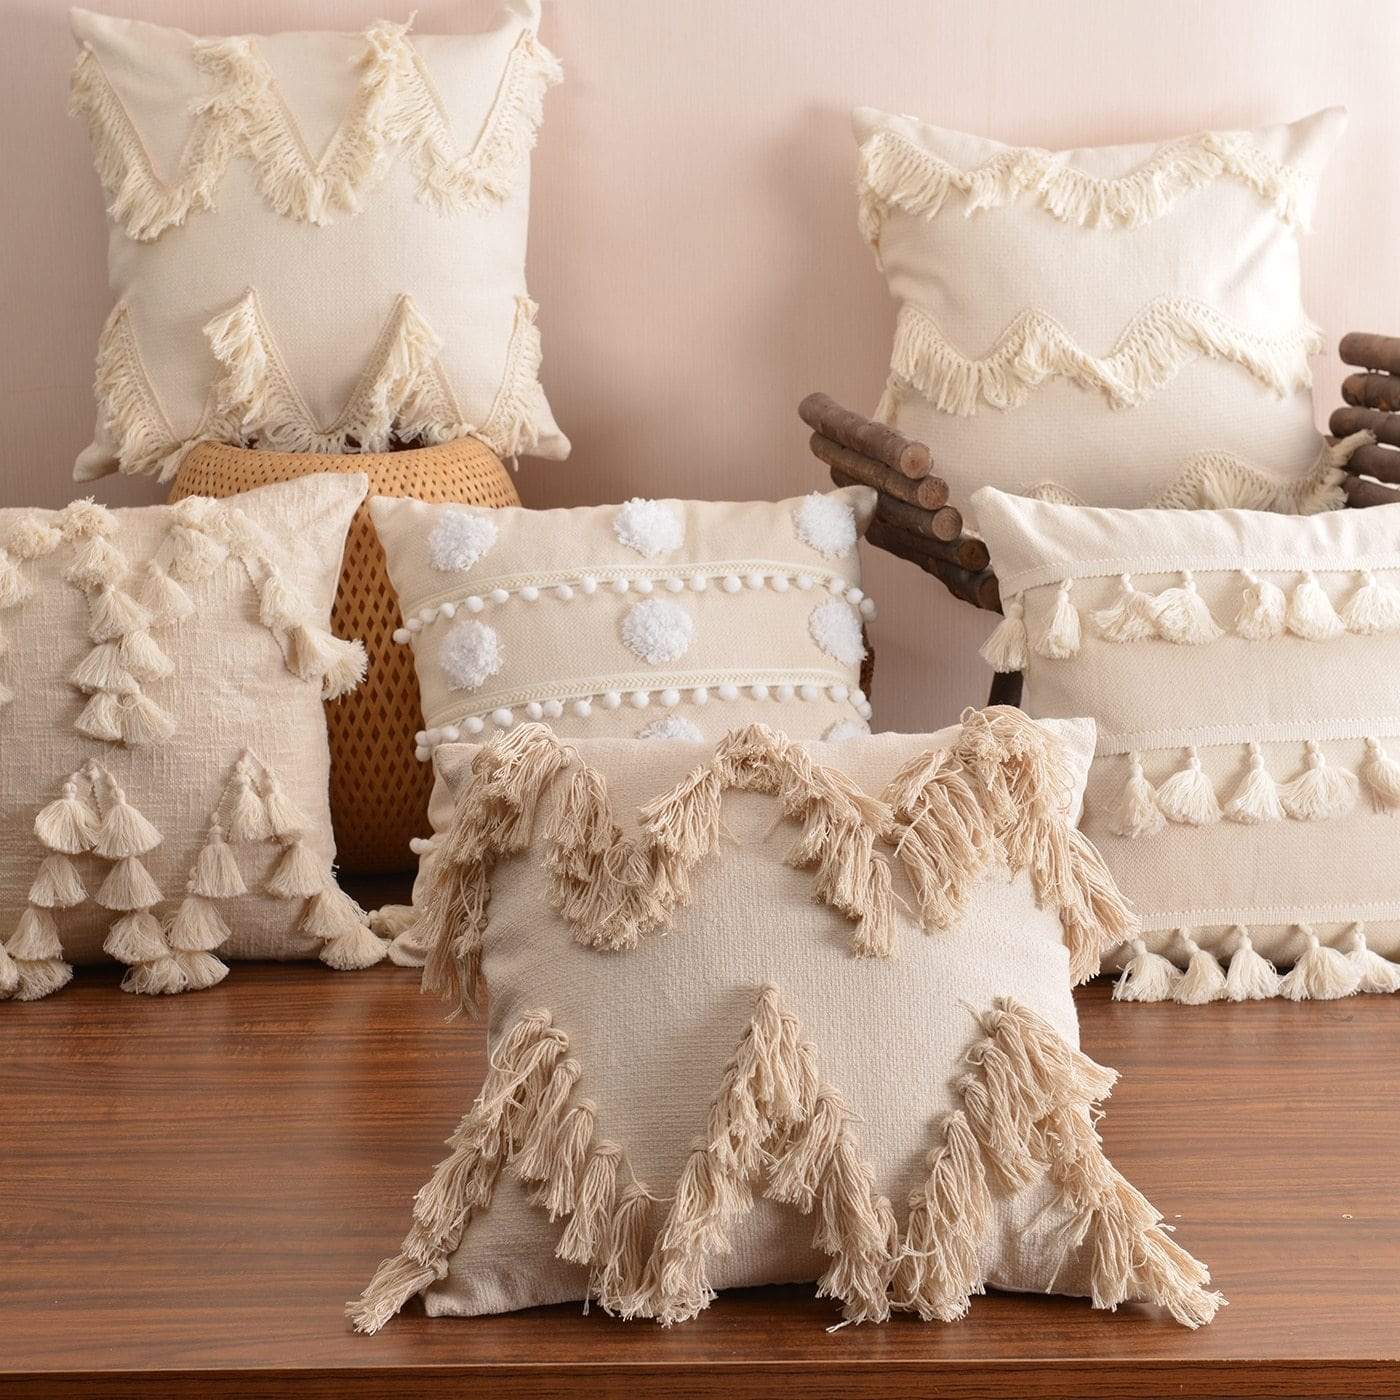 Boho Plush Pillow Cover With Tassels